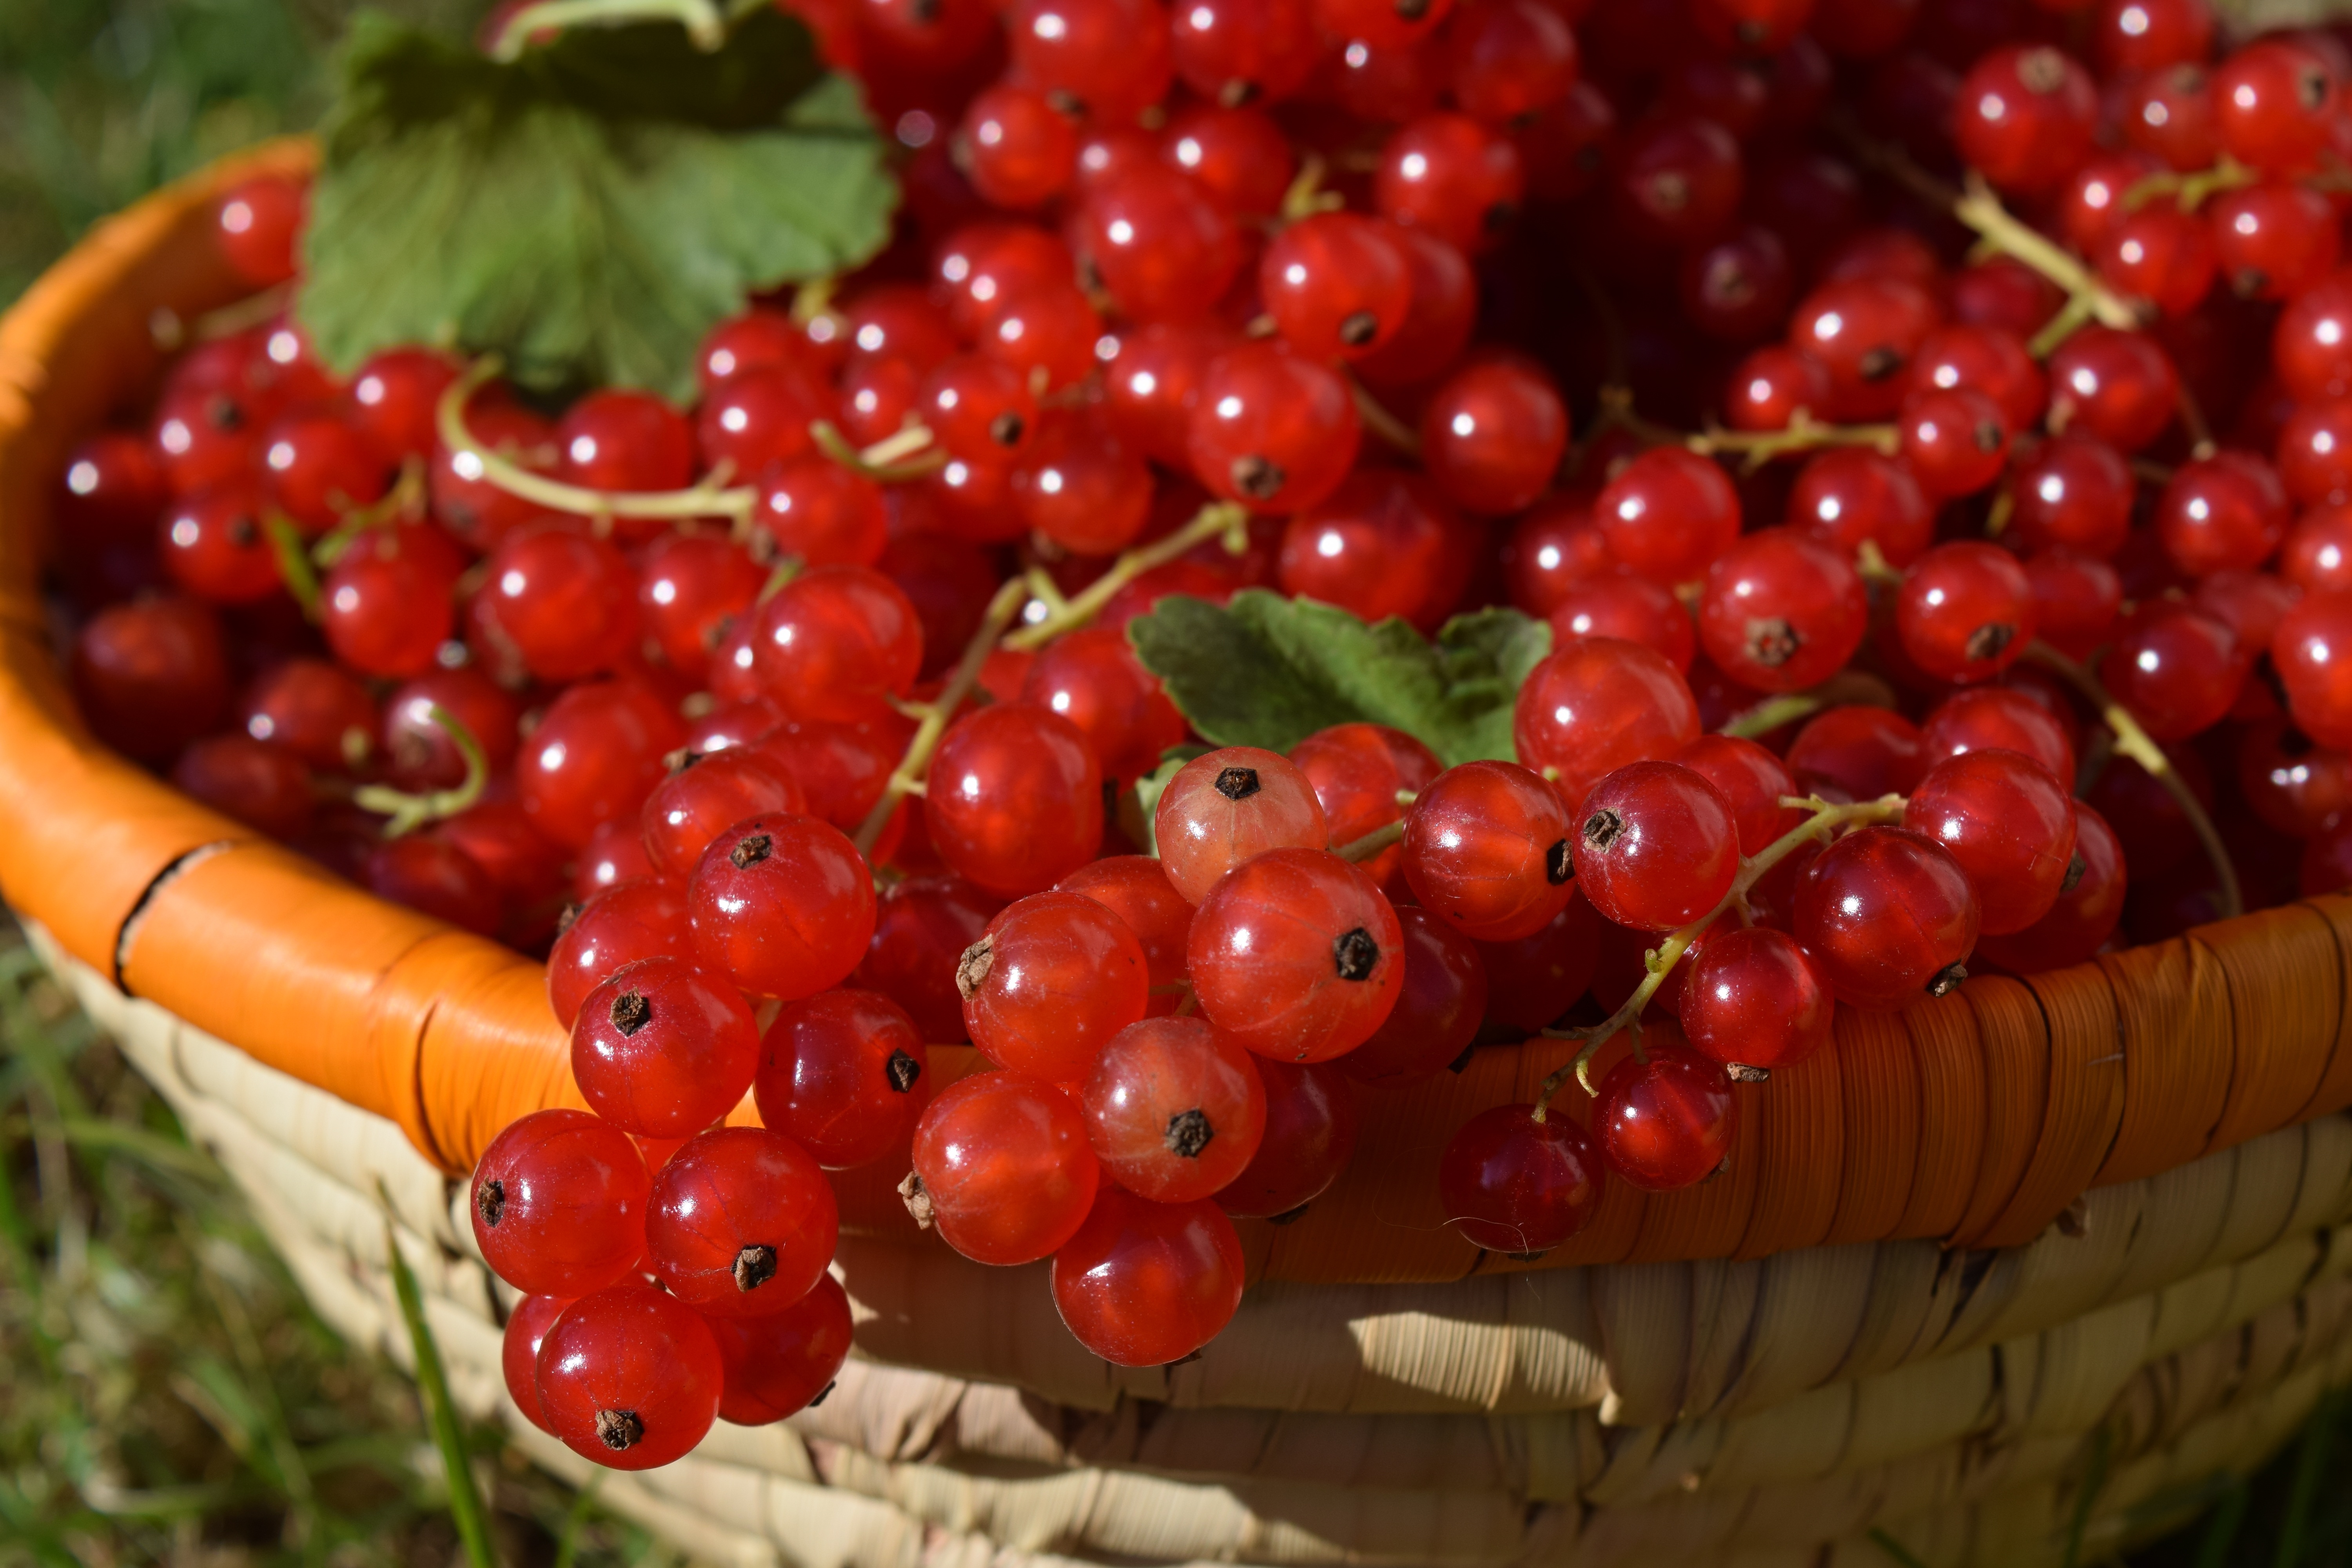 food, berries, currant, basket, ripe, red currants, redcurrant